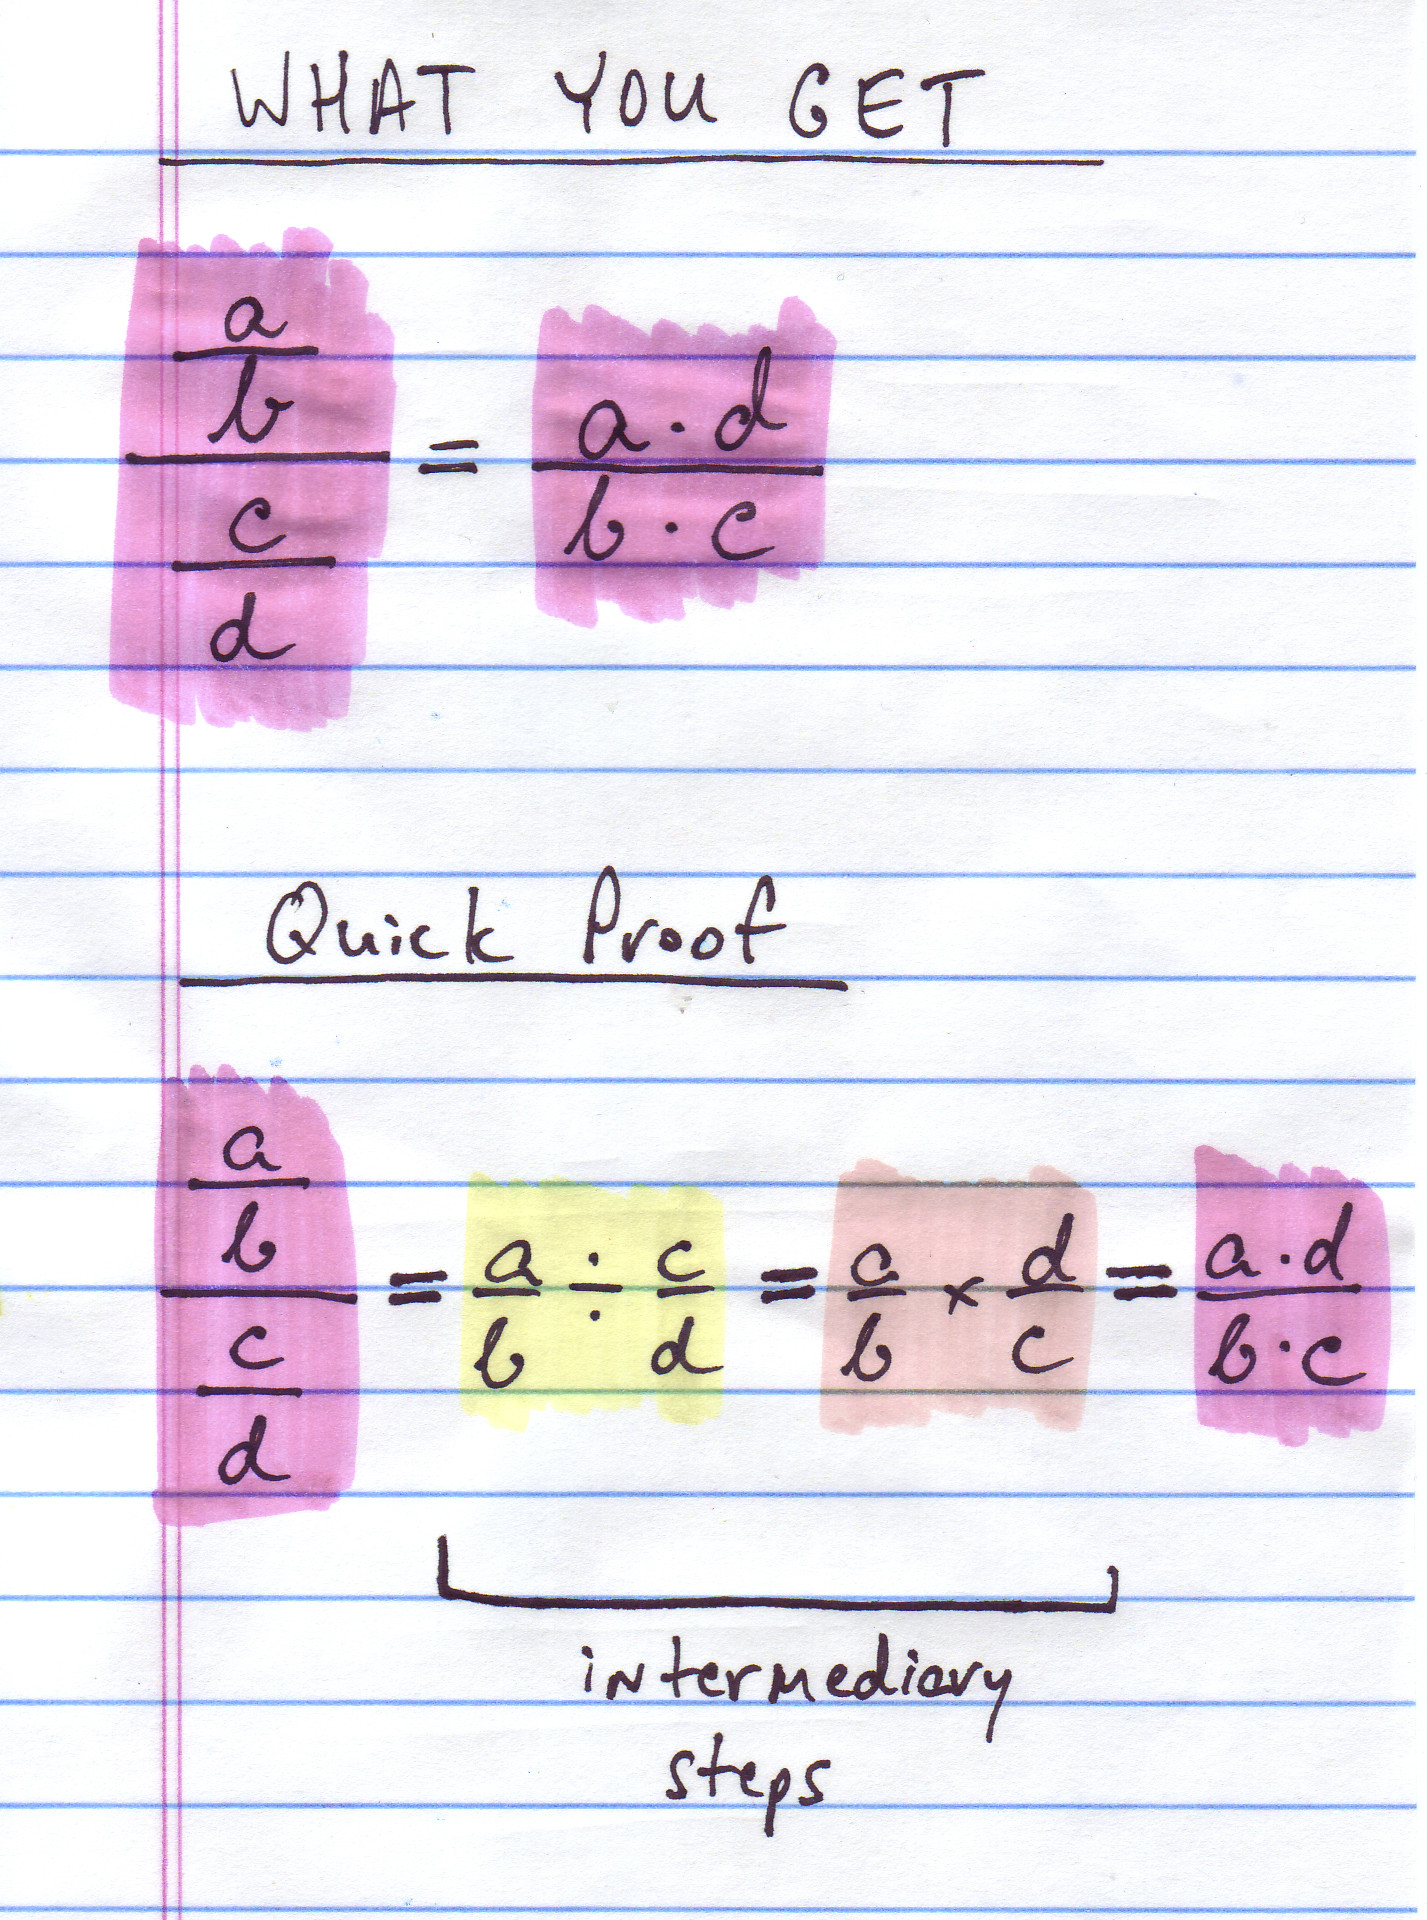 Dividing Fractions Using Models Worksheet How to Divide Fractions From Annoying to Fun